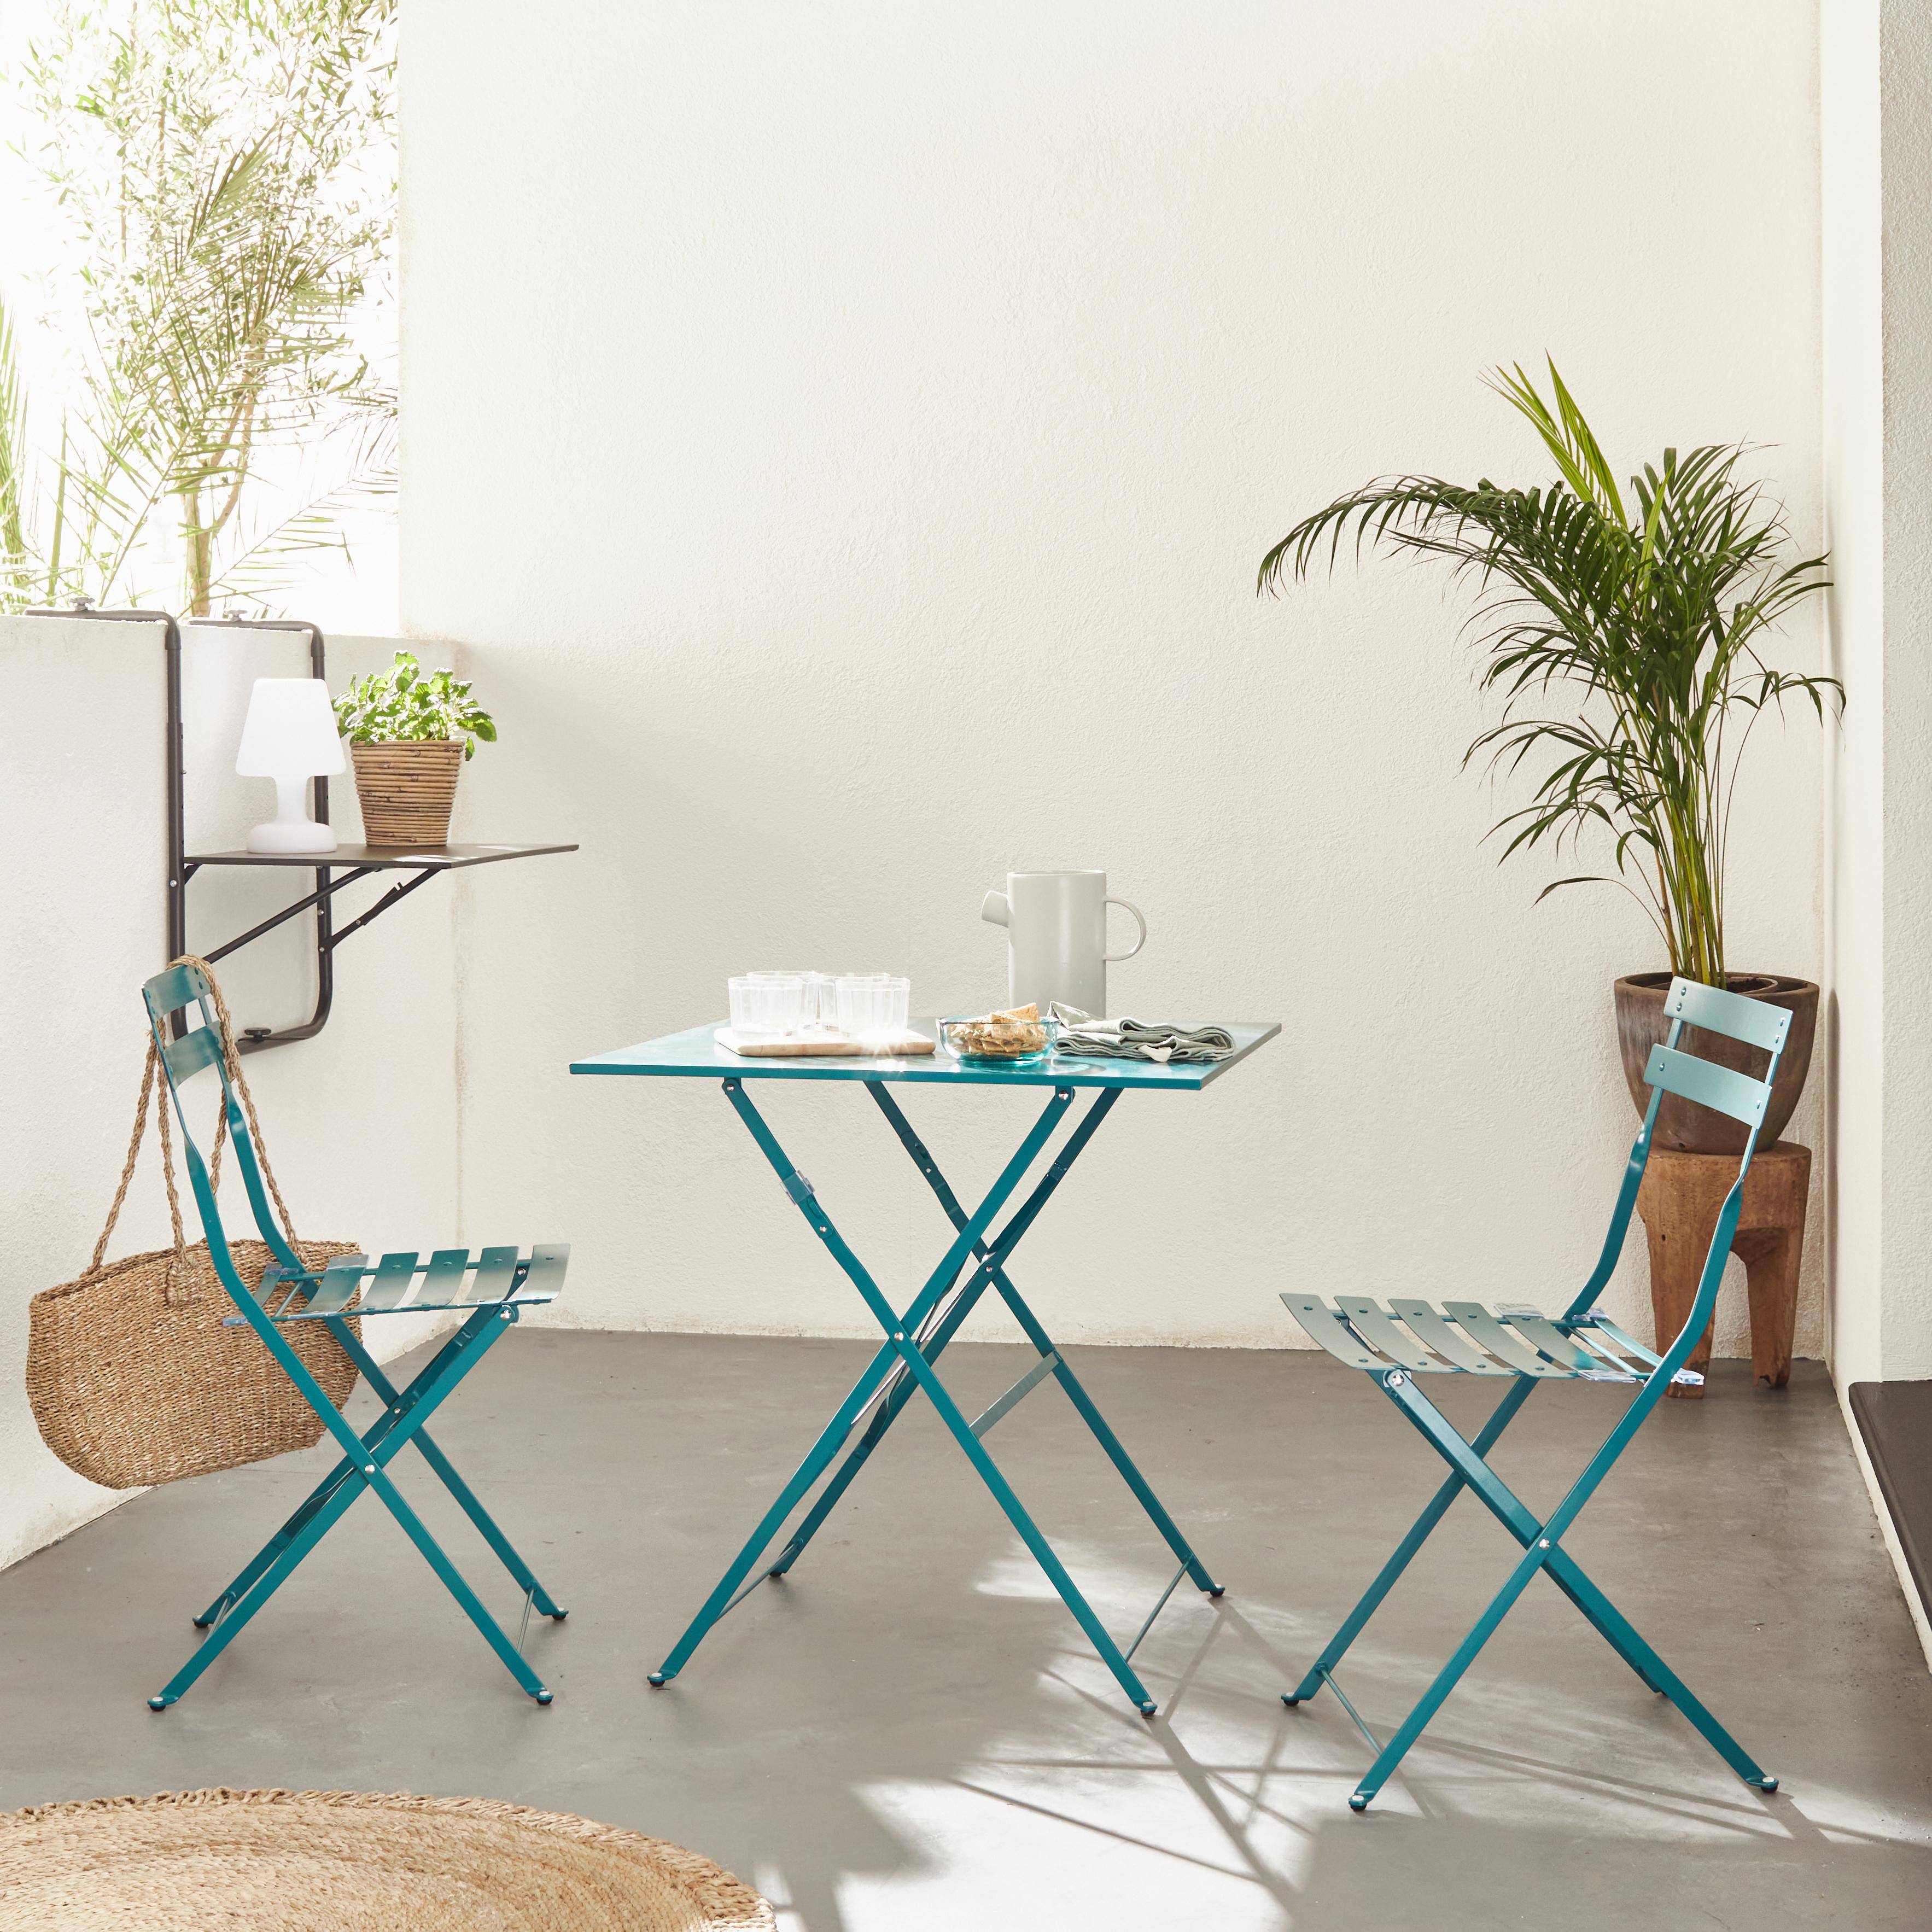 2-seater foldable thermo-lacquered steel bistro garden table with chairs, 70x70cm - Emilia - Duck Blue,sweeek,Photo1